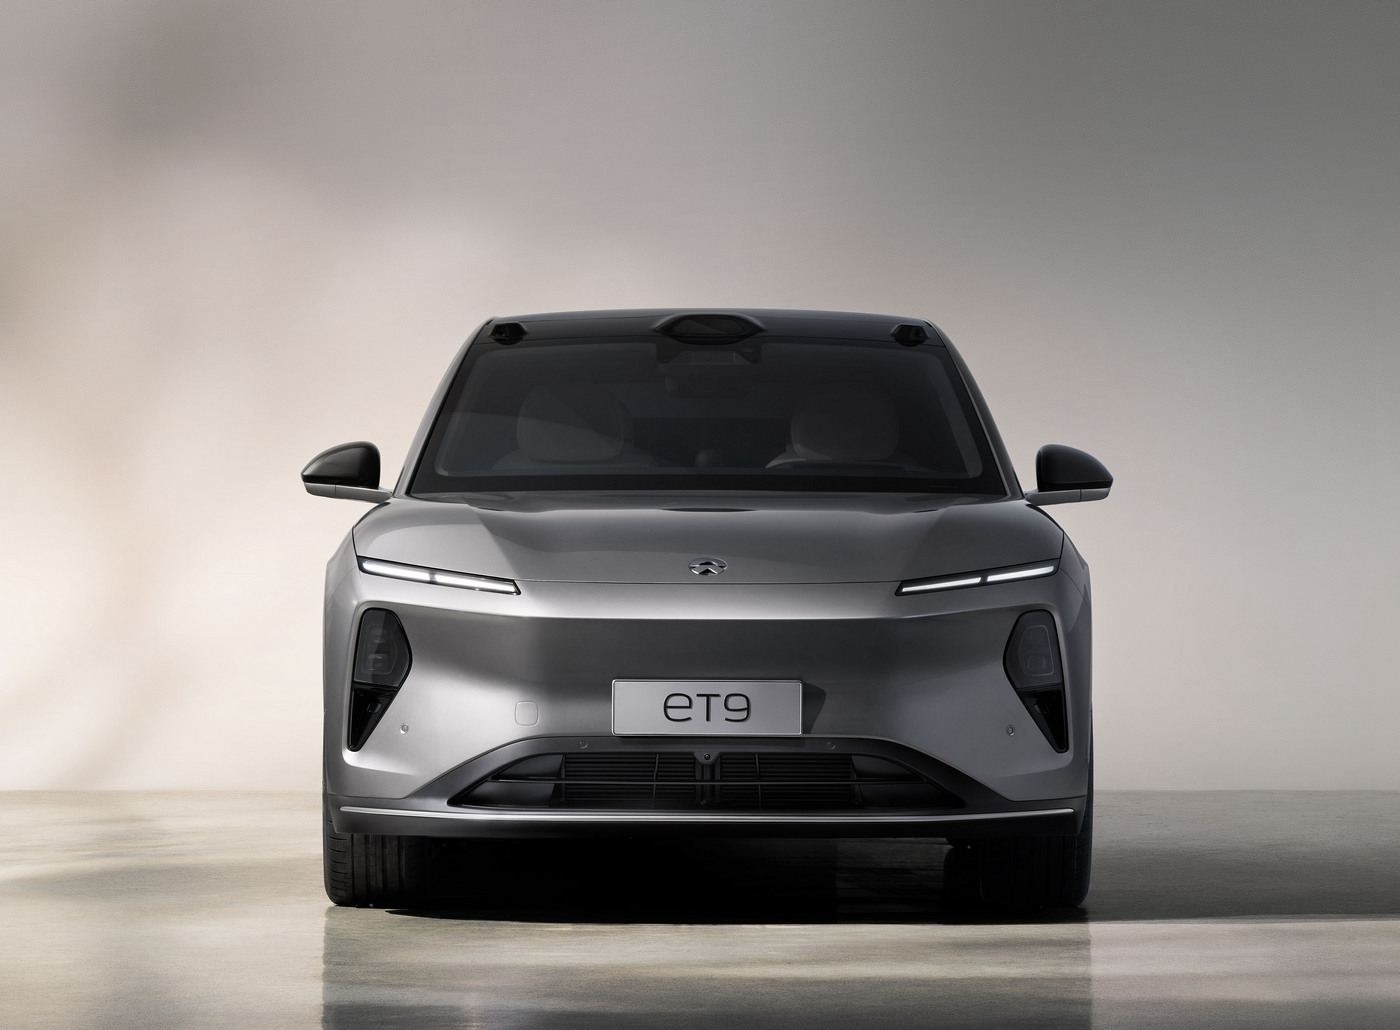 NIO ET9, a showcase of cutting-edge technology, is priced at 800,000 yuan